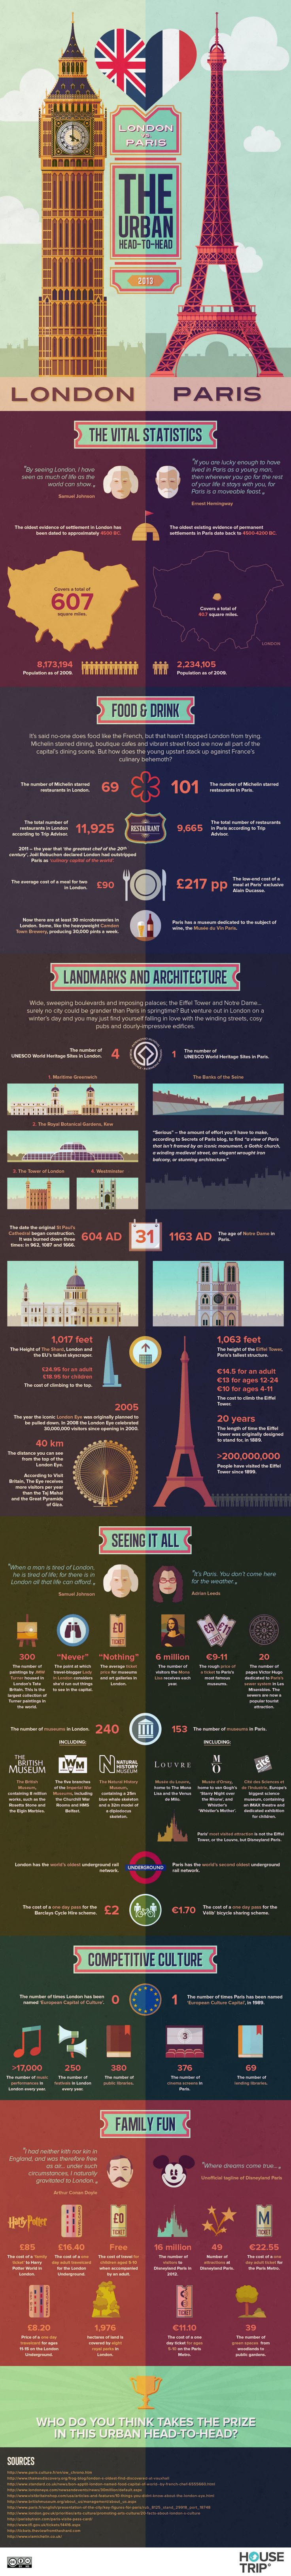 10 Thing About Infographic of City